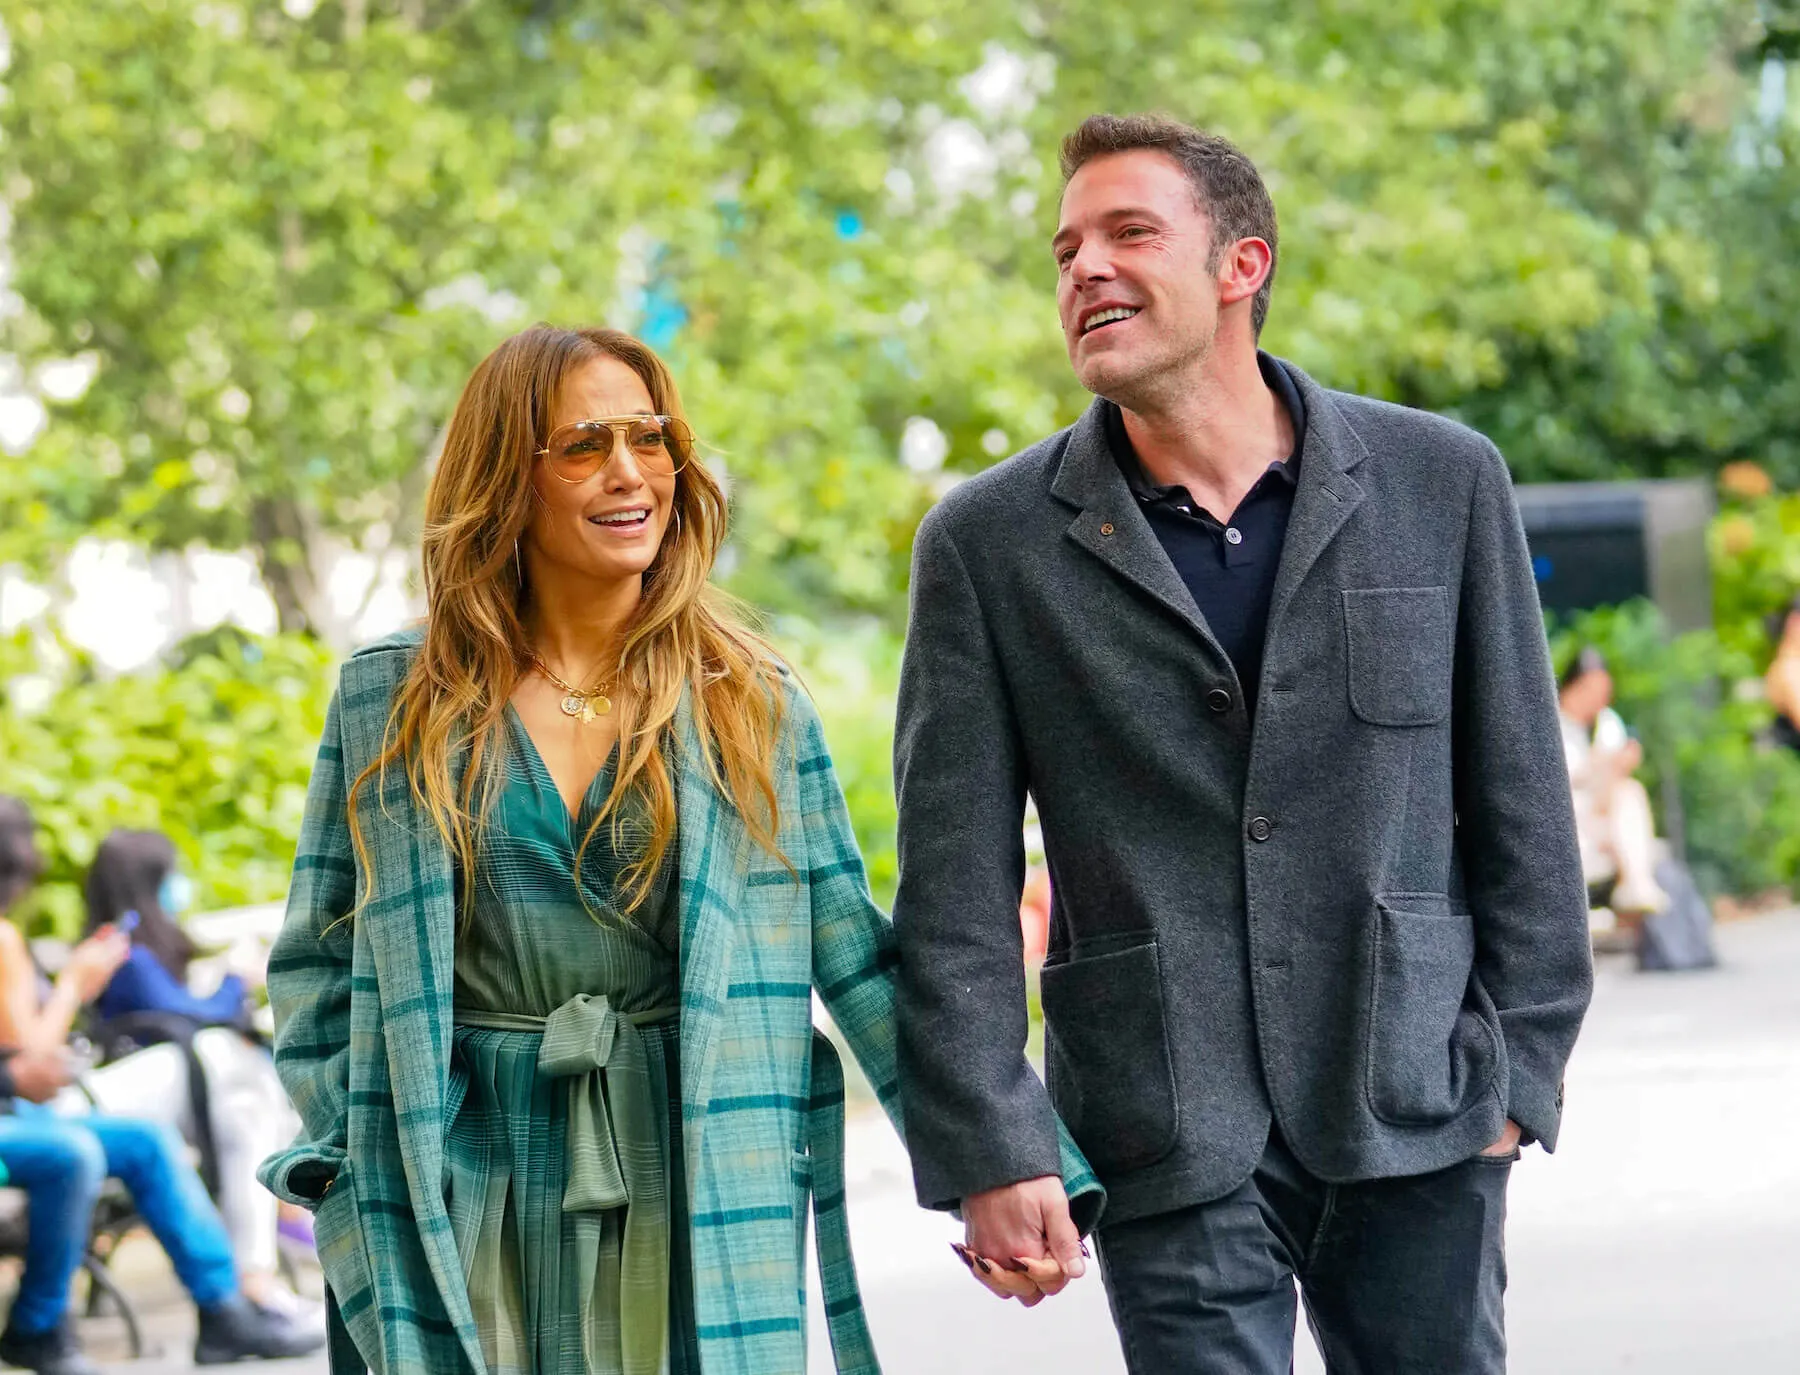 Jennifer Lopez in a green plaid coat walking hand in hand with Ben Affleck in a gray blazer in New York City